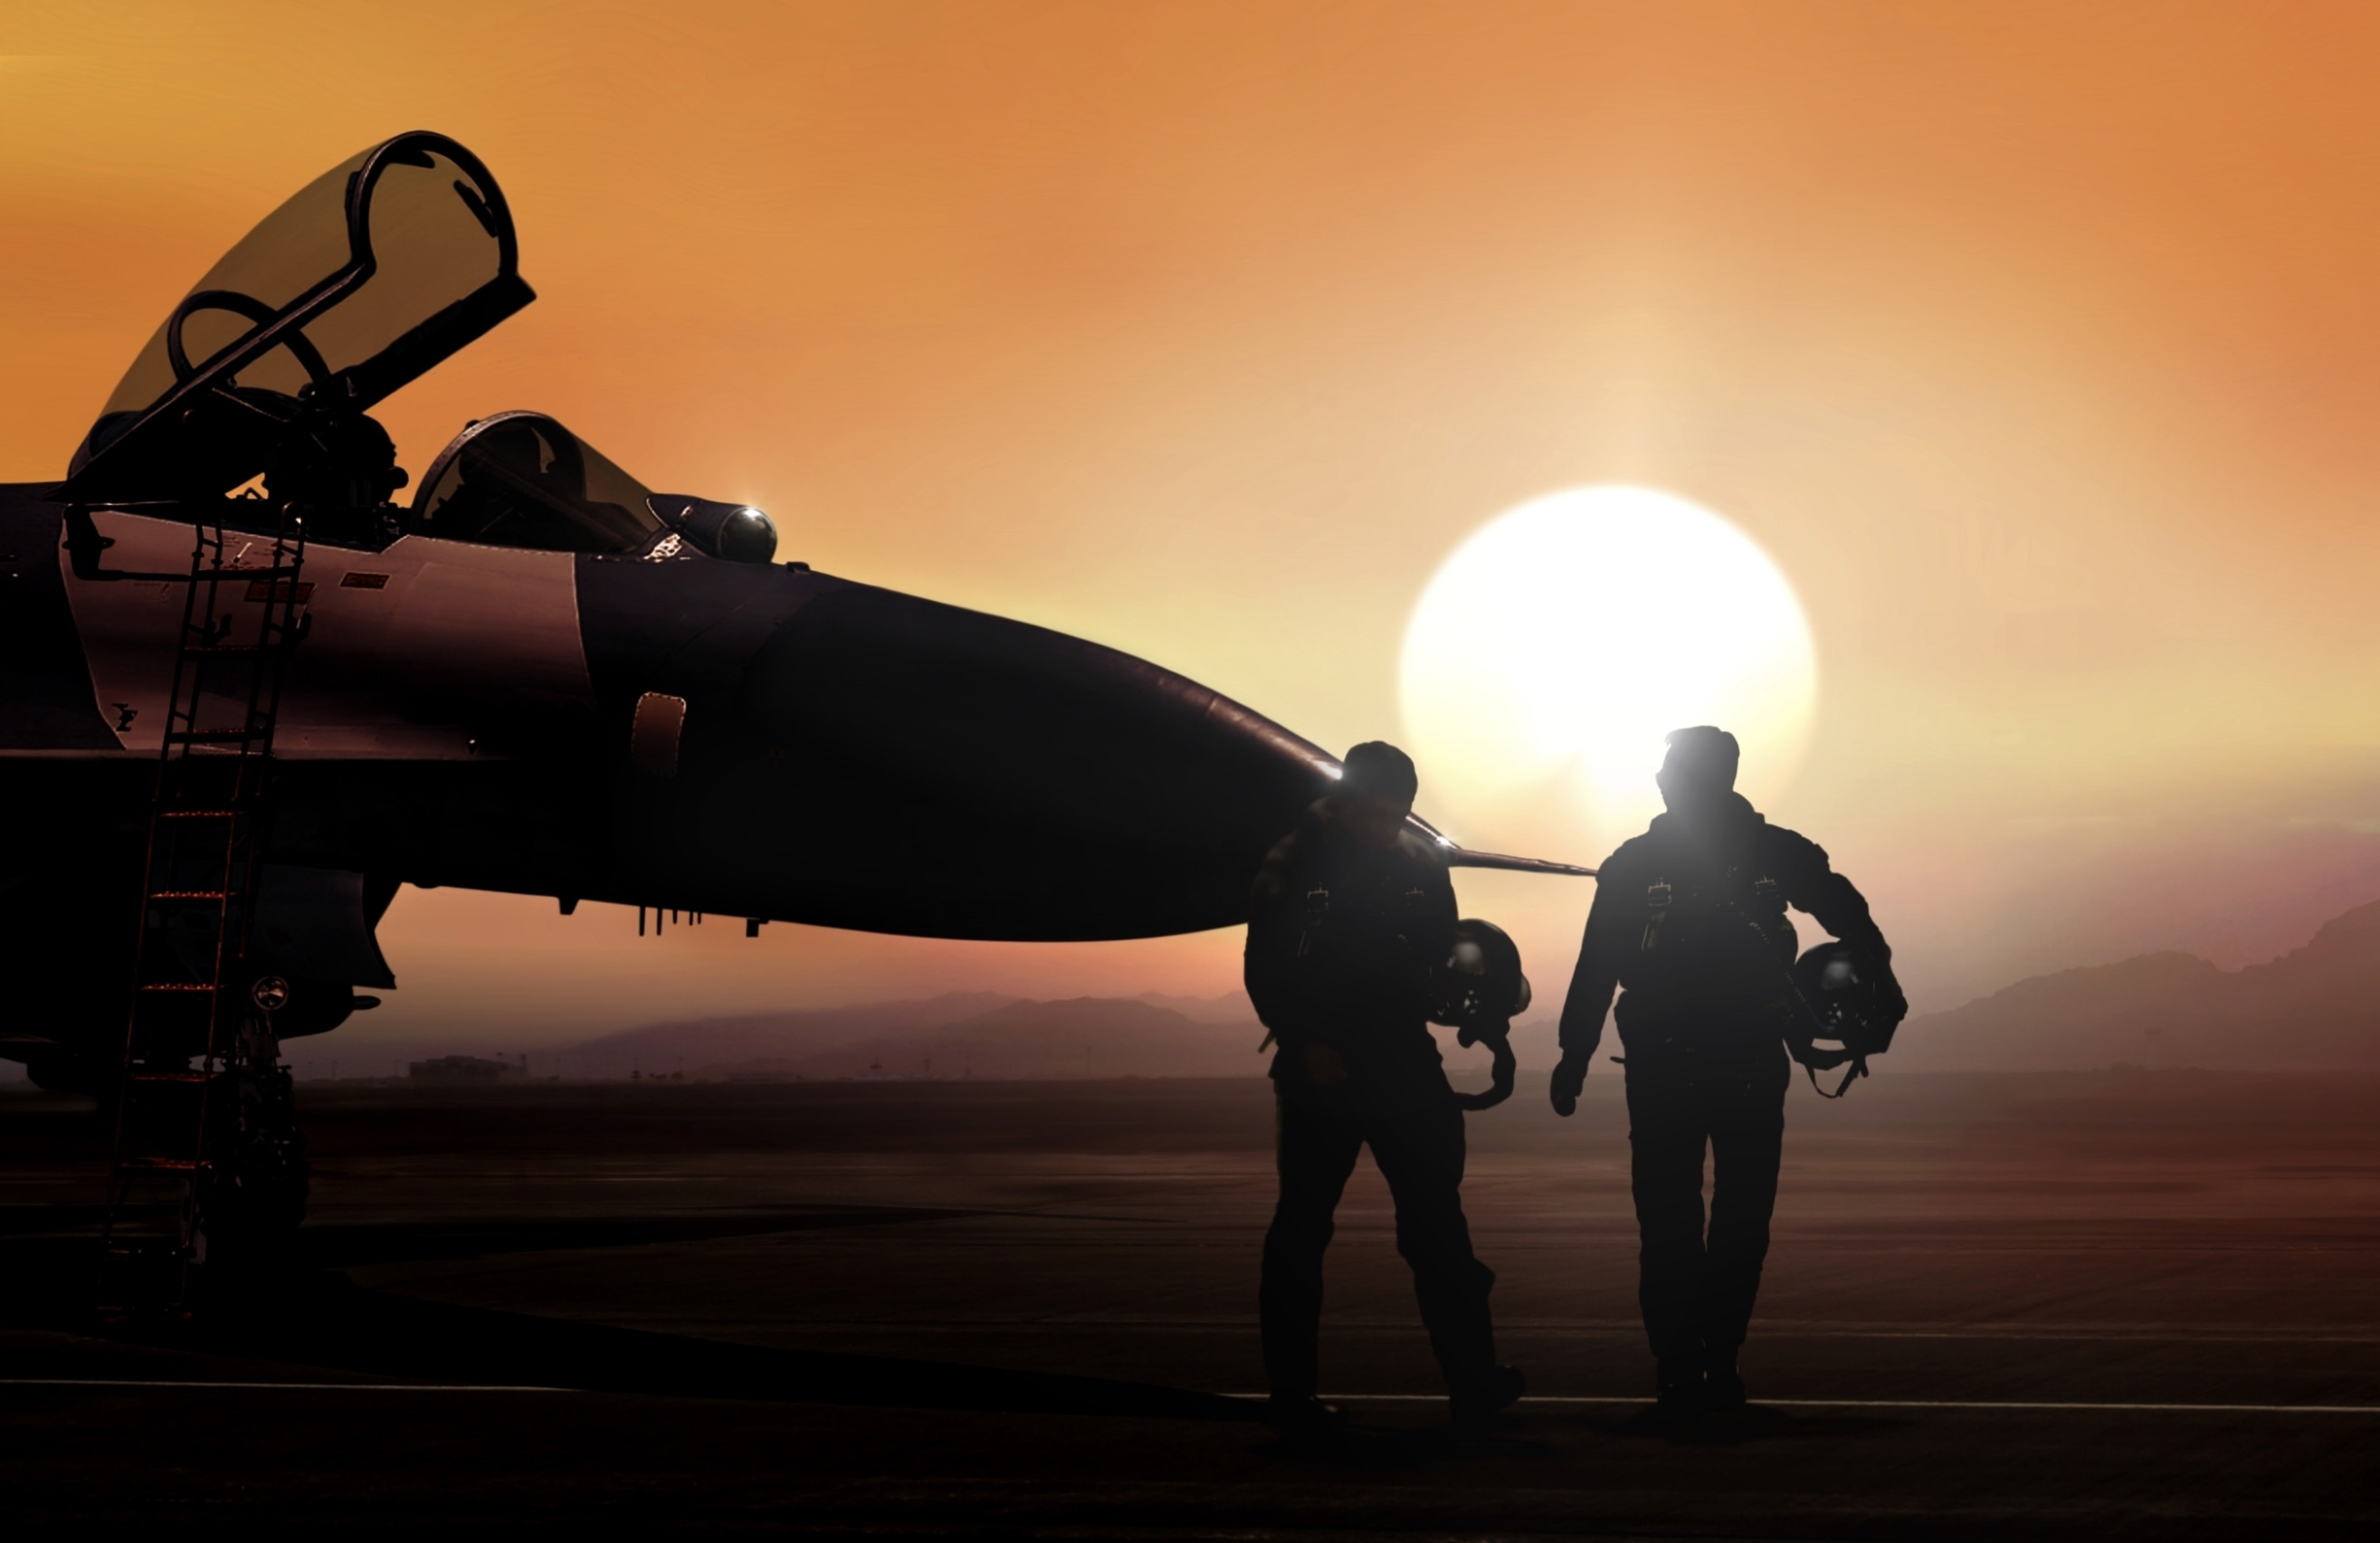 Two fighter pilots walking towards a fighter jet